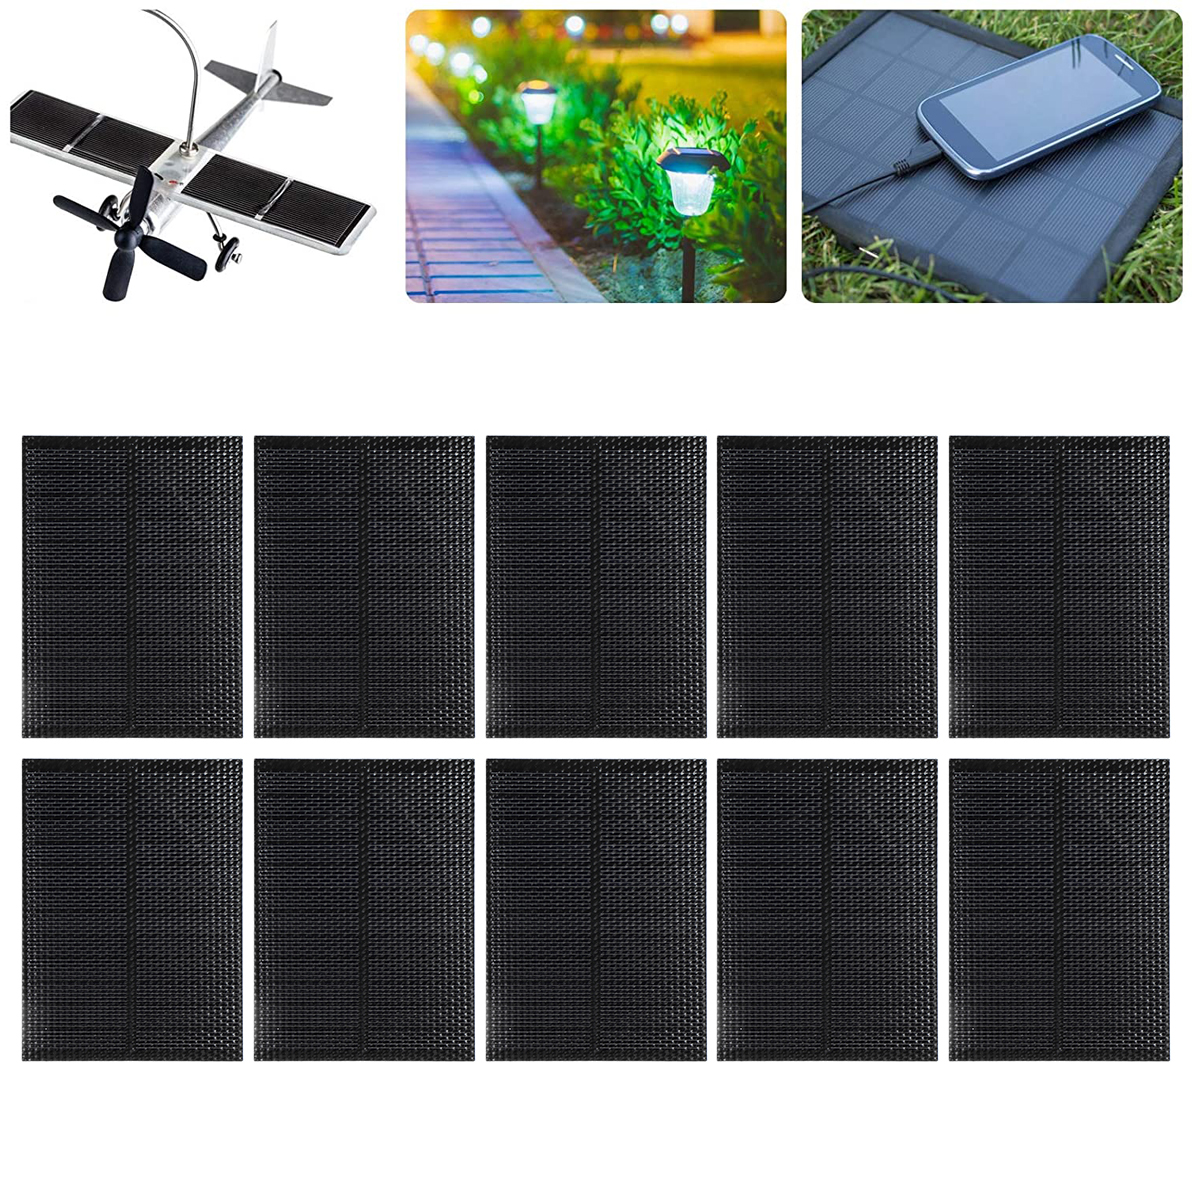 10-PCS-110times-80mm-ETFE-Mini-Solar-Cell-With-Bottom-Plate-Mono-Solar-Panel-Solar-Battery-Charger-S-1935844-11